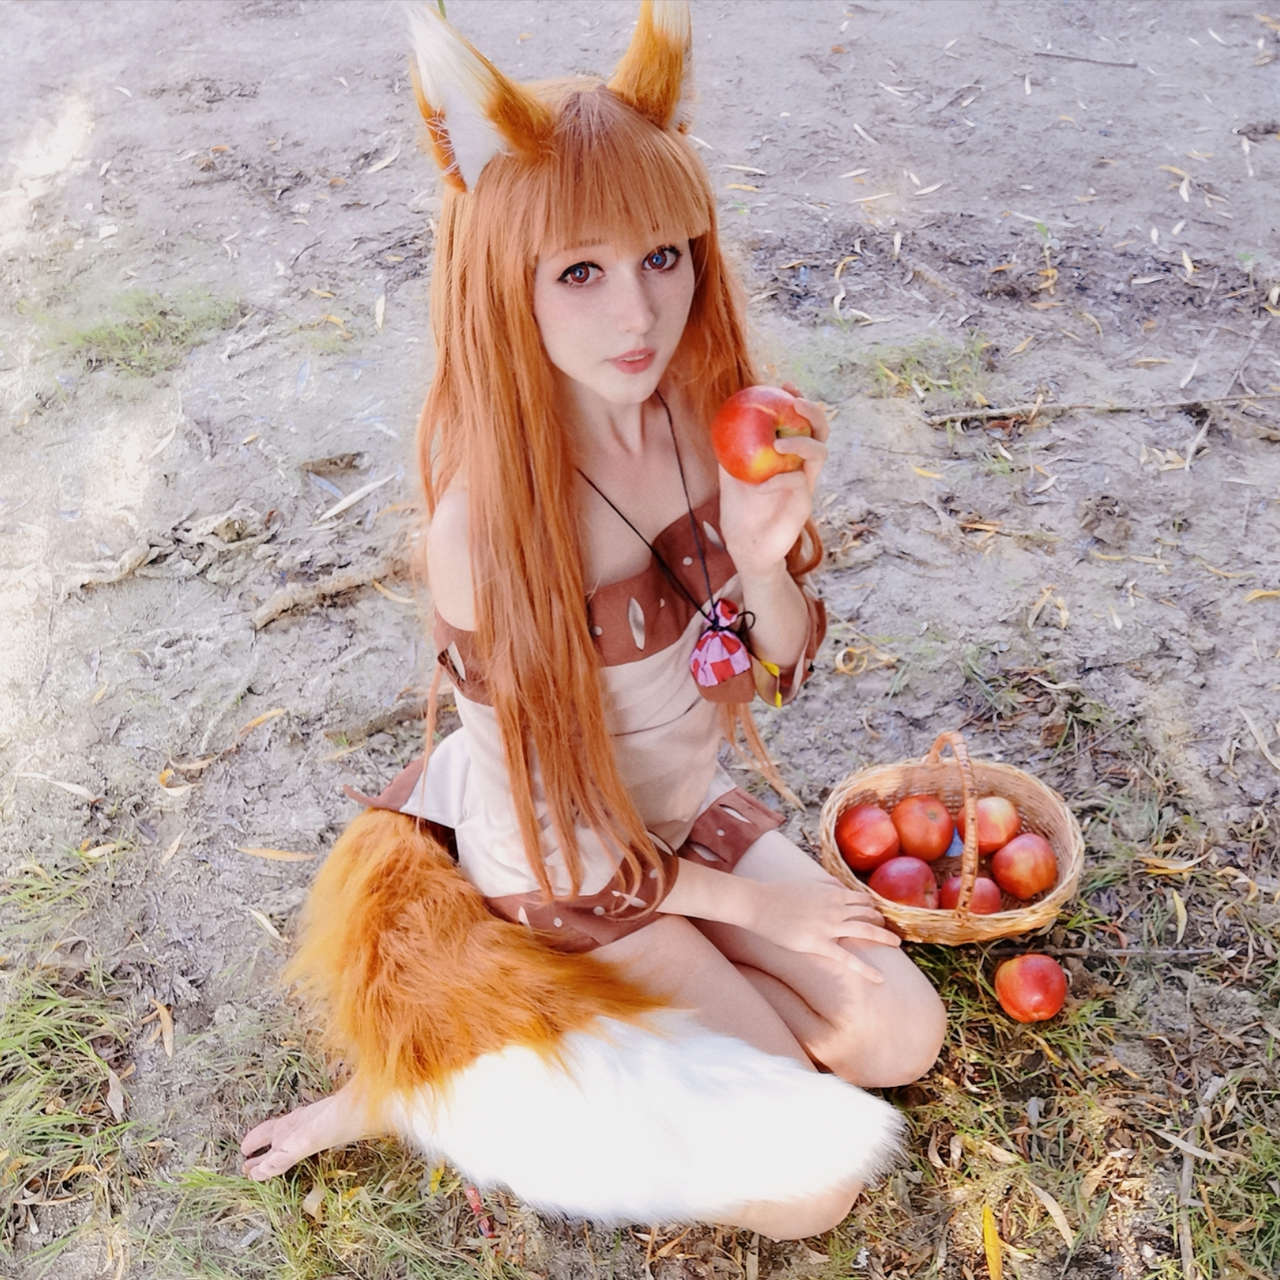 My Spice And Wolf Cospla